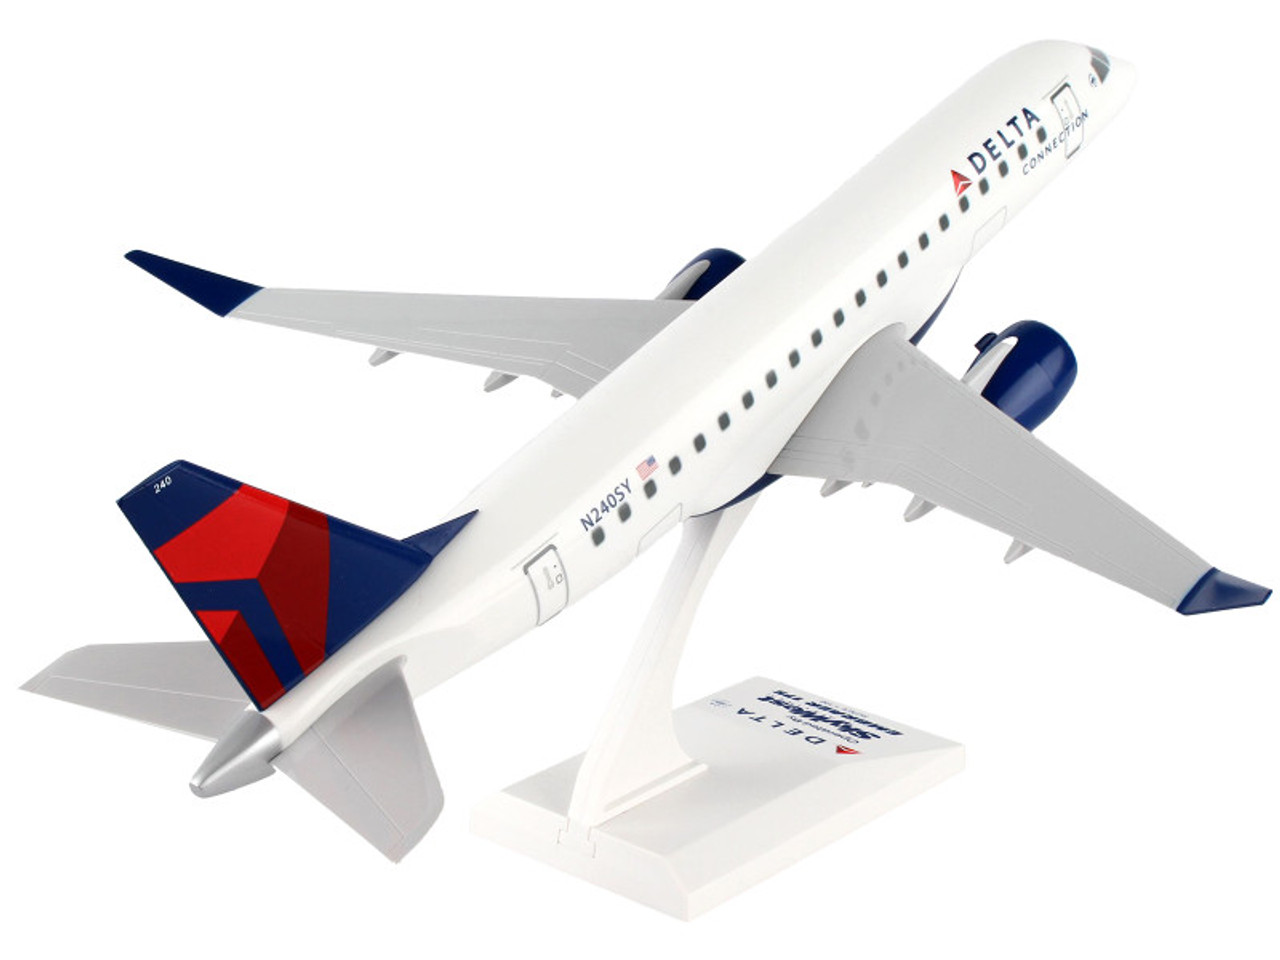 Embraer E175 Commercial Aircraft "Delta Air Lines" (N240SY) White with Red and Blue Tail (Snap-Fit) 1/100 Plastic Model by Skymarks